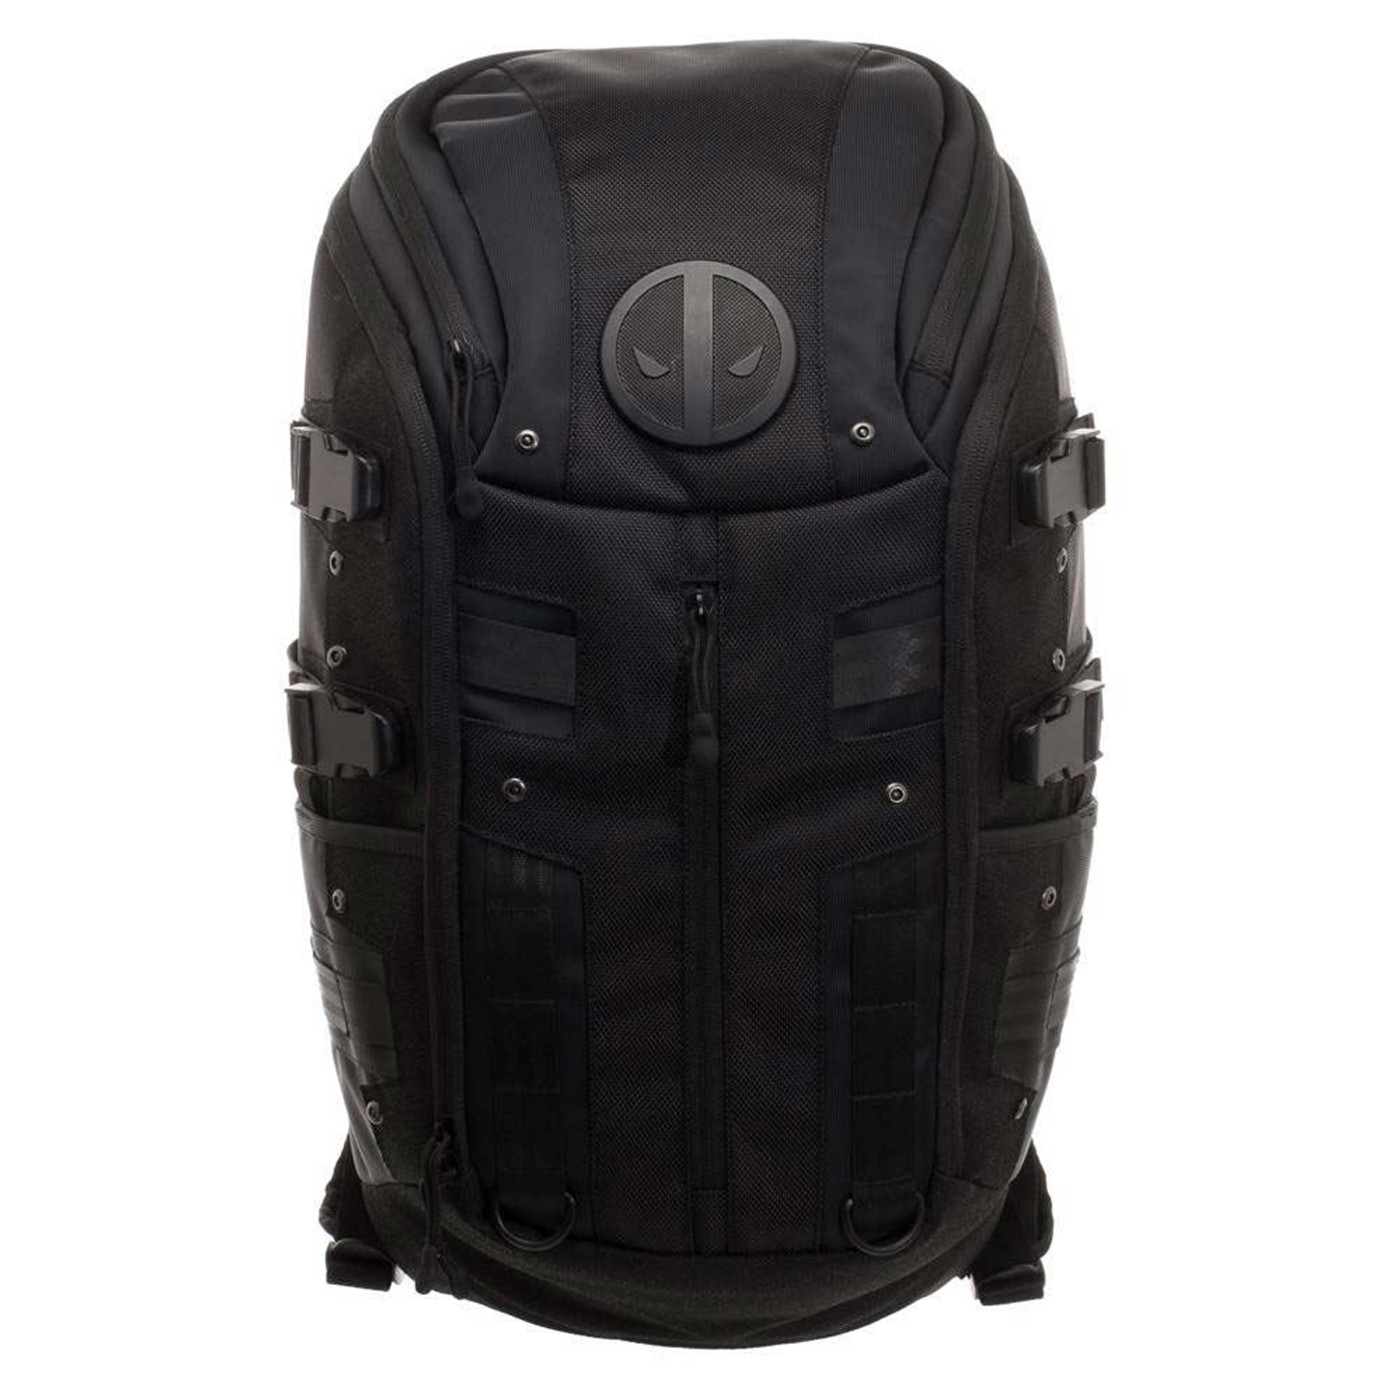 Deadpool Tactical Backpack - image 1 of 4